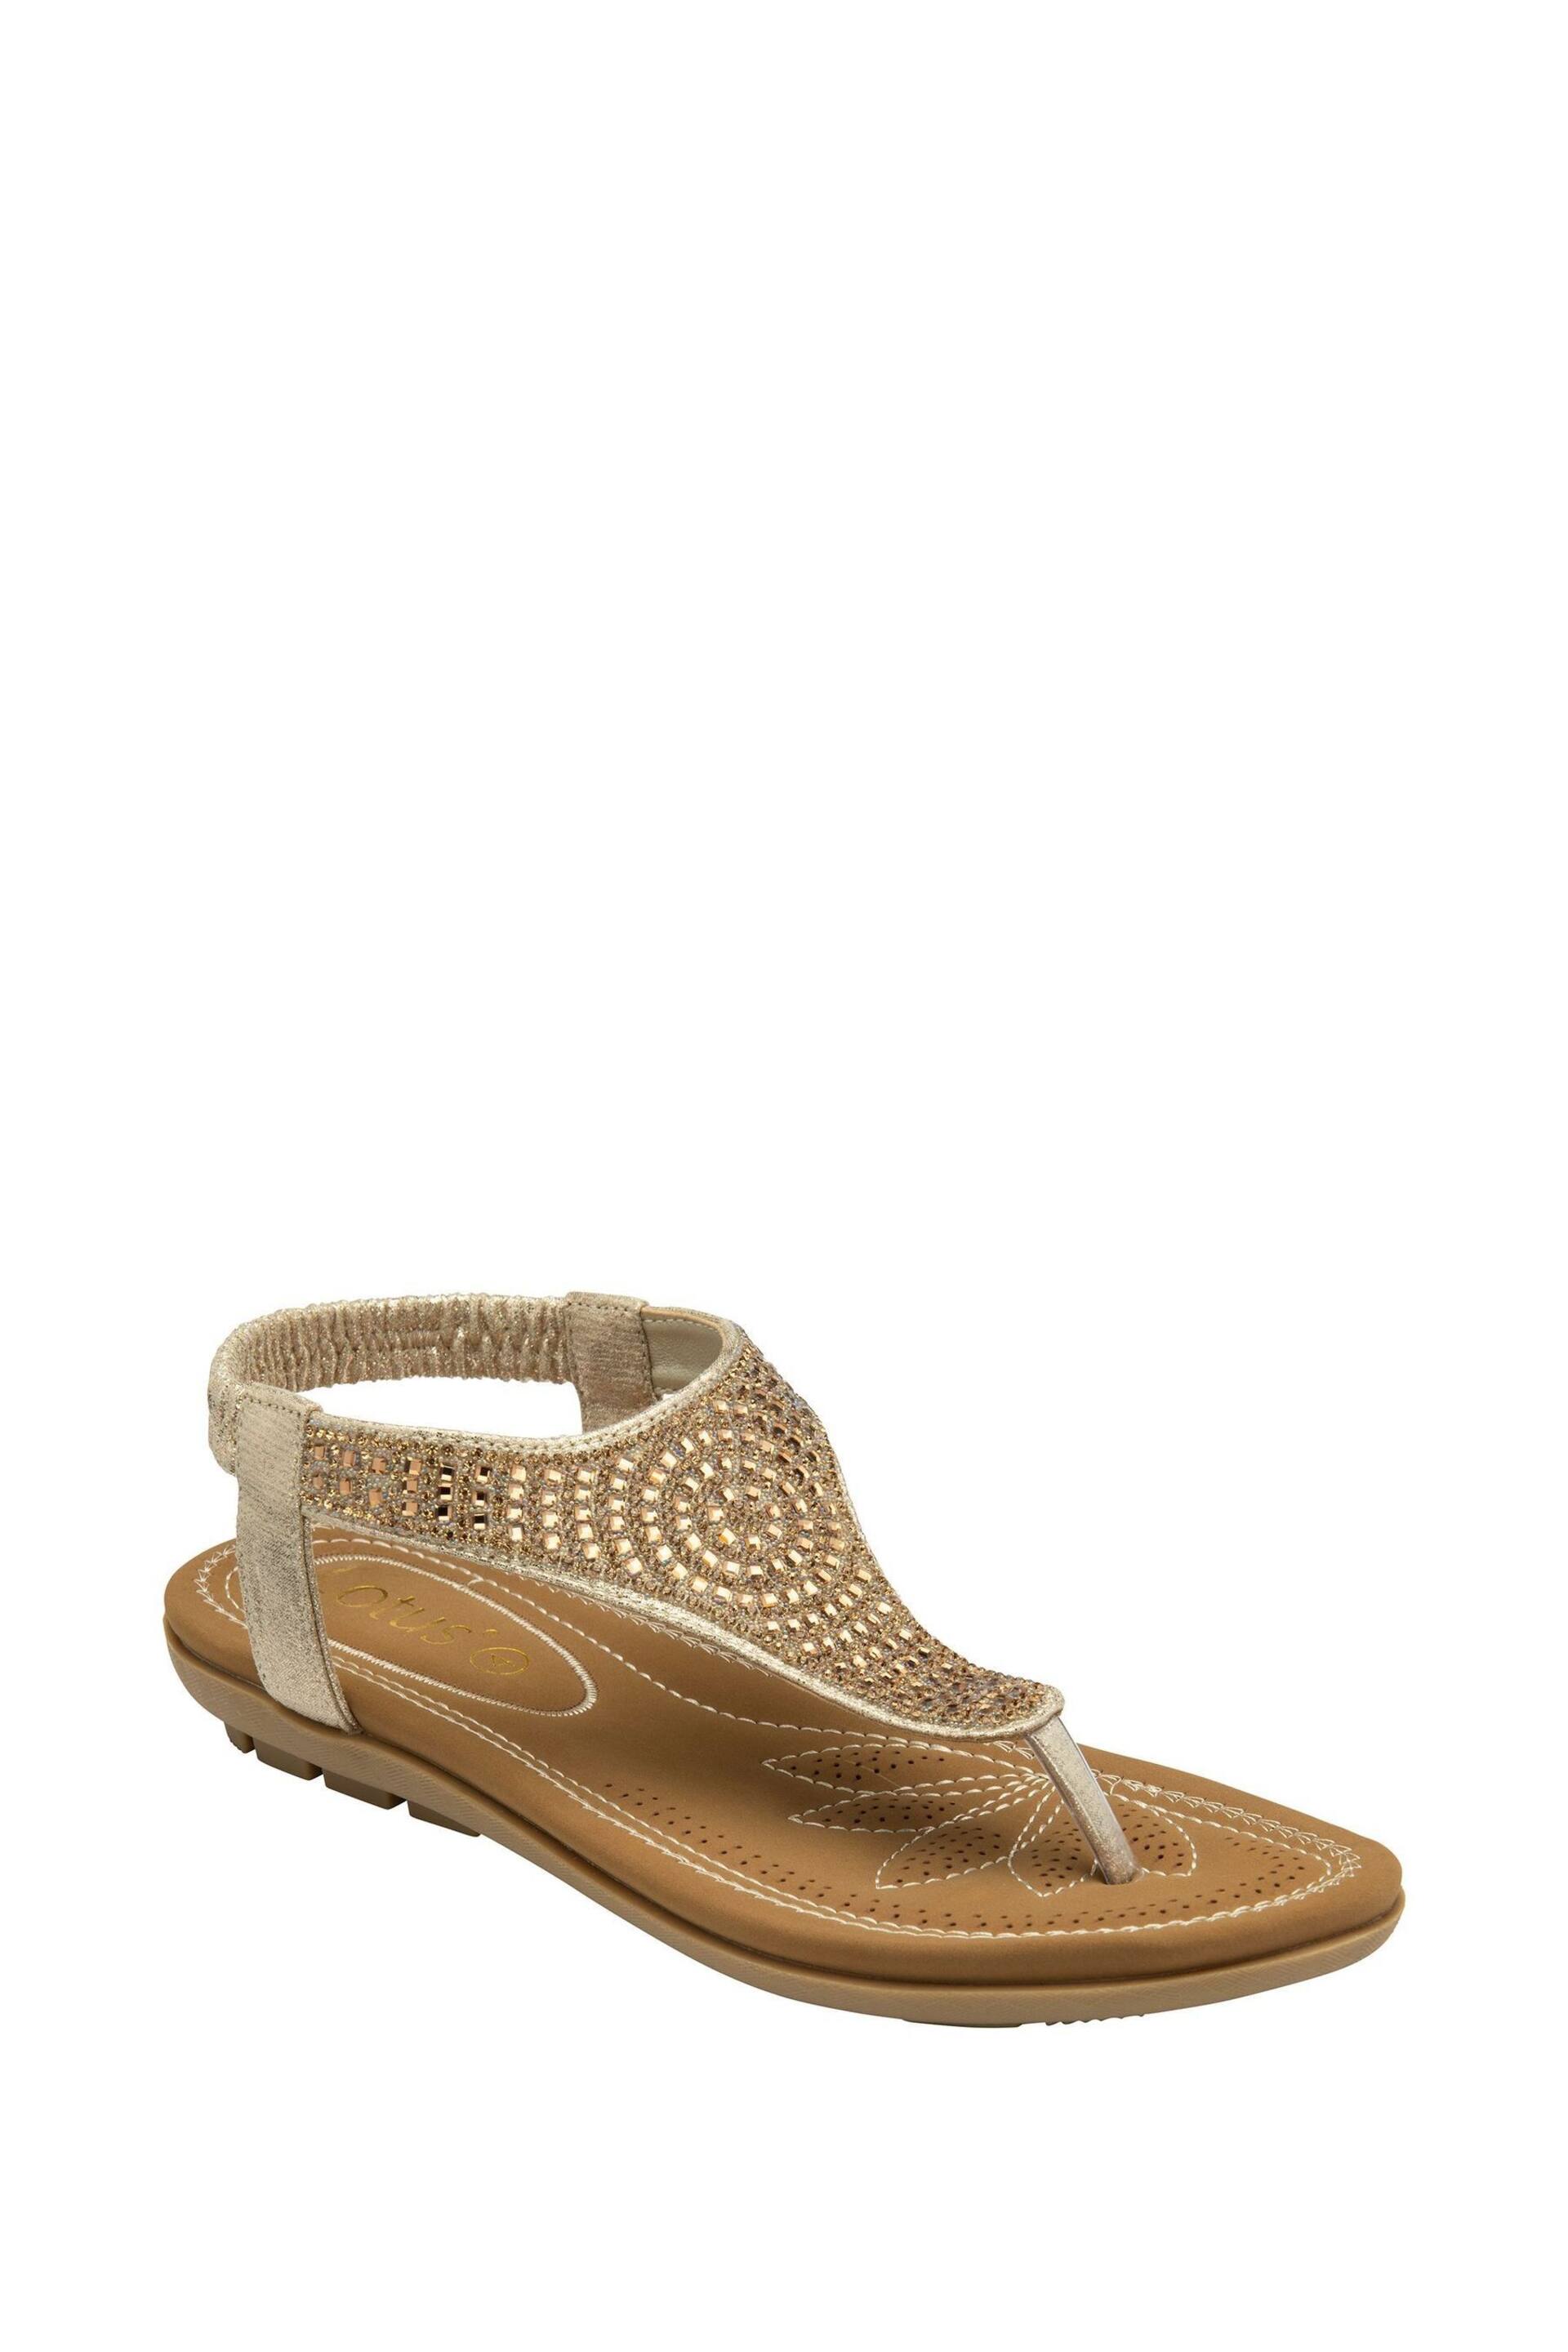 Lotus Gold Toe-Post Sandals - Image 1 of 3